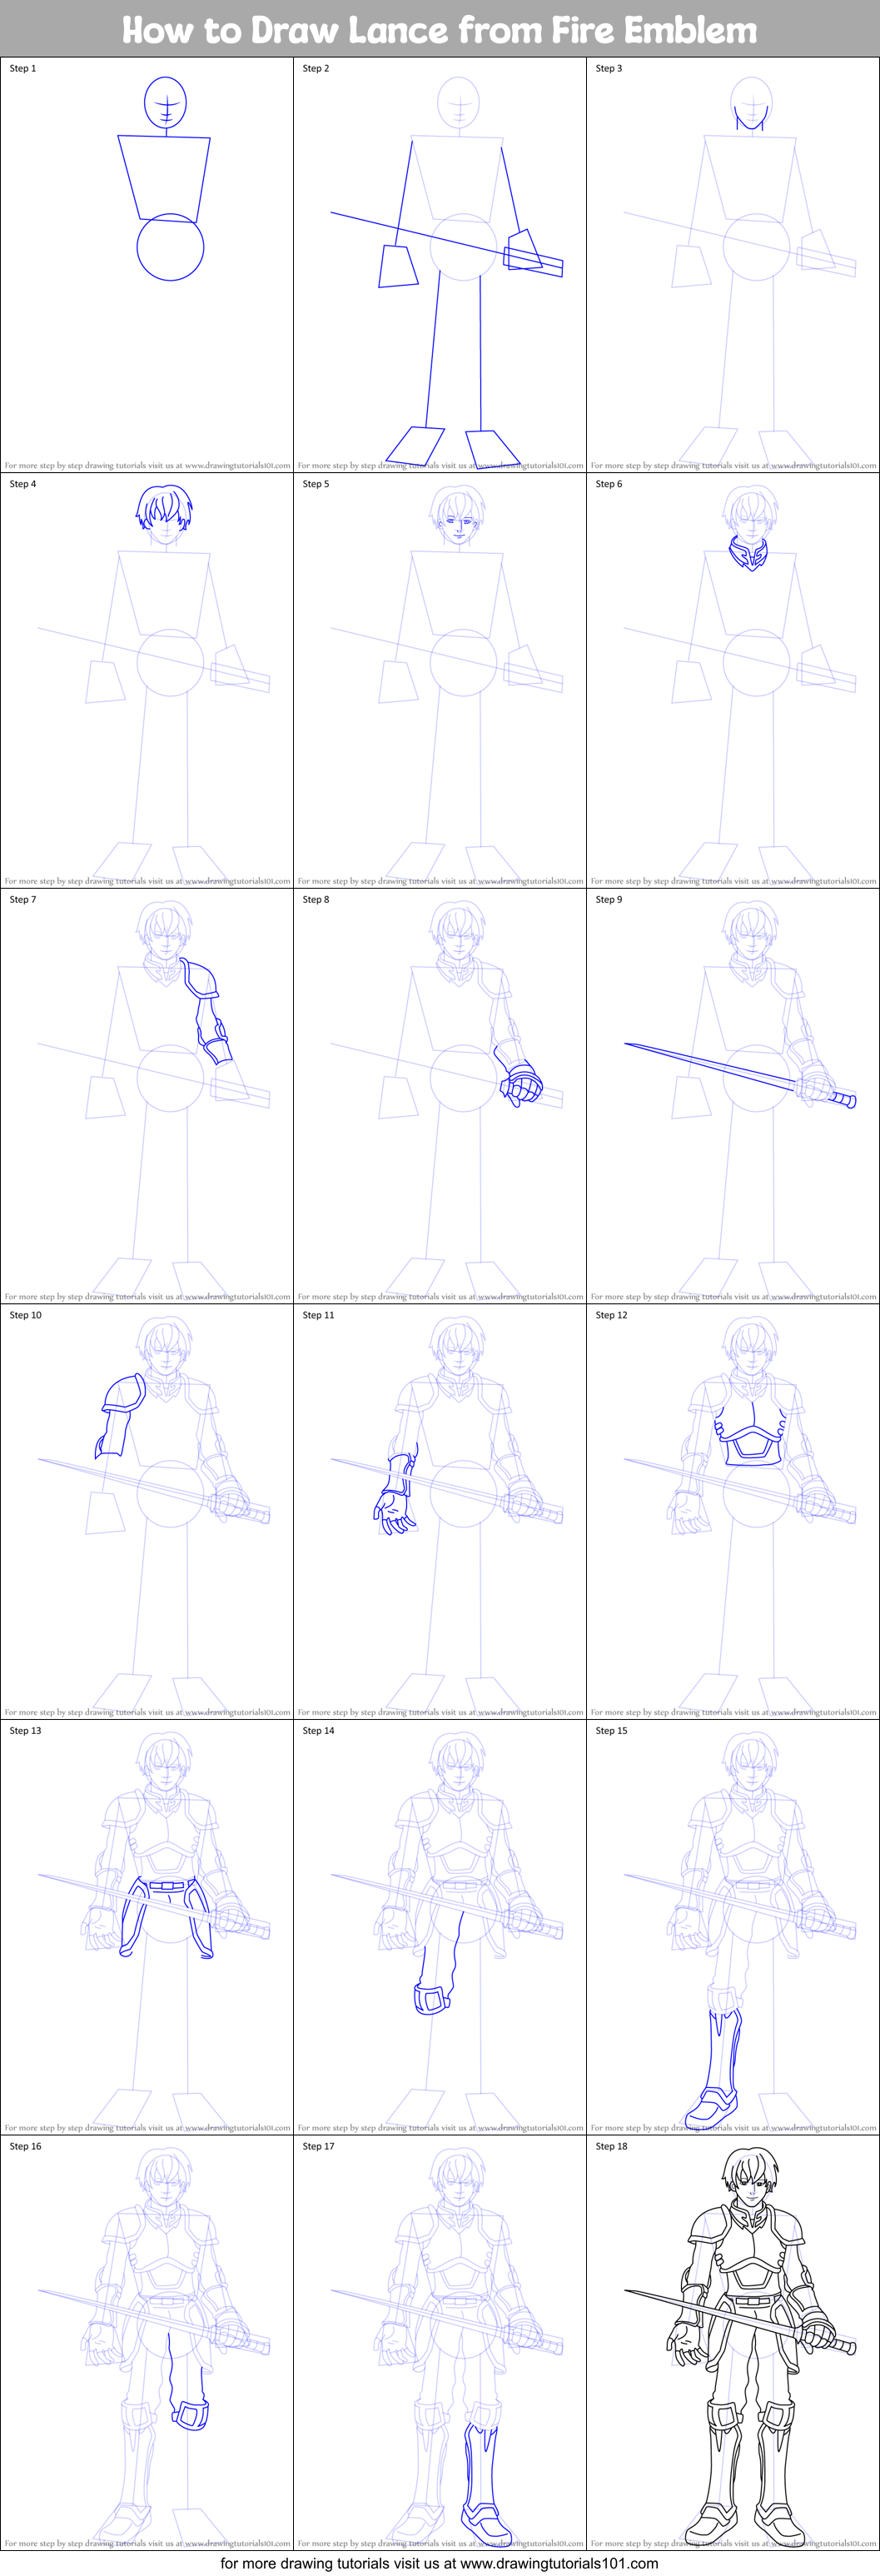 How to Draw Lance from Fire Emblem printable step by step drawing sheet ...